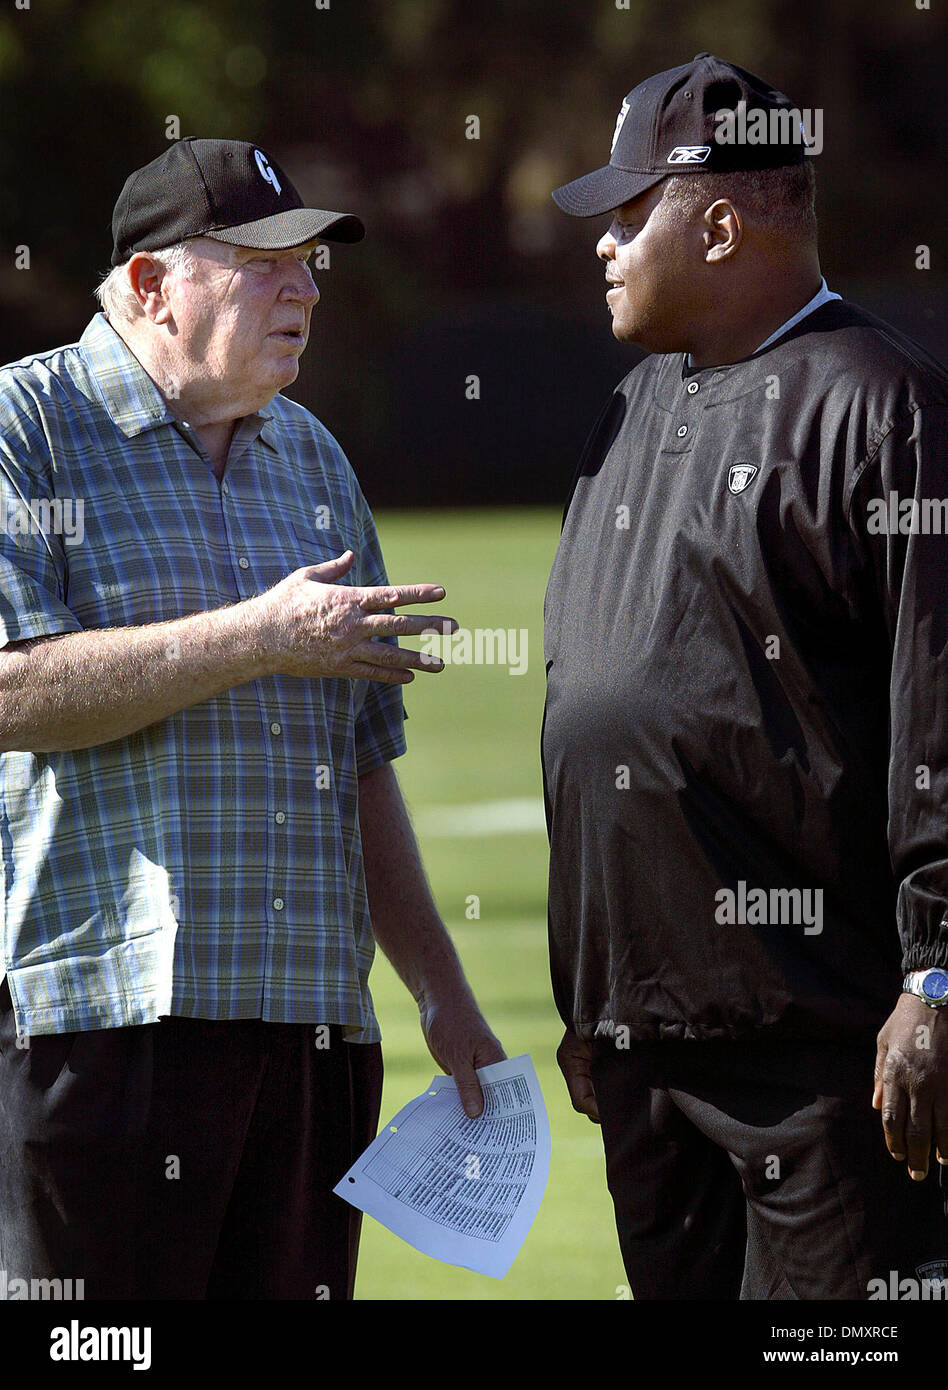 MONDAY JULY 24, 2006 NAPA, CA. - Raiders Head Coach Art Shell speaks with  John Madden during the first day of Oakland Raiders training camp at  Redwood Middle School in Napa on